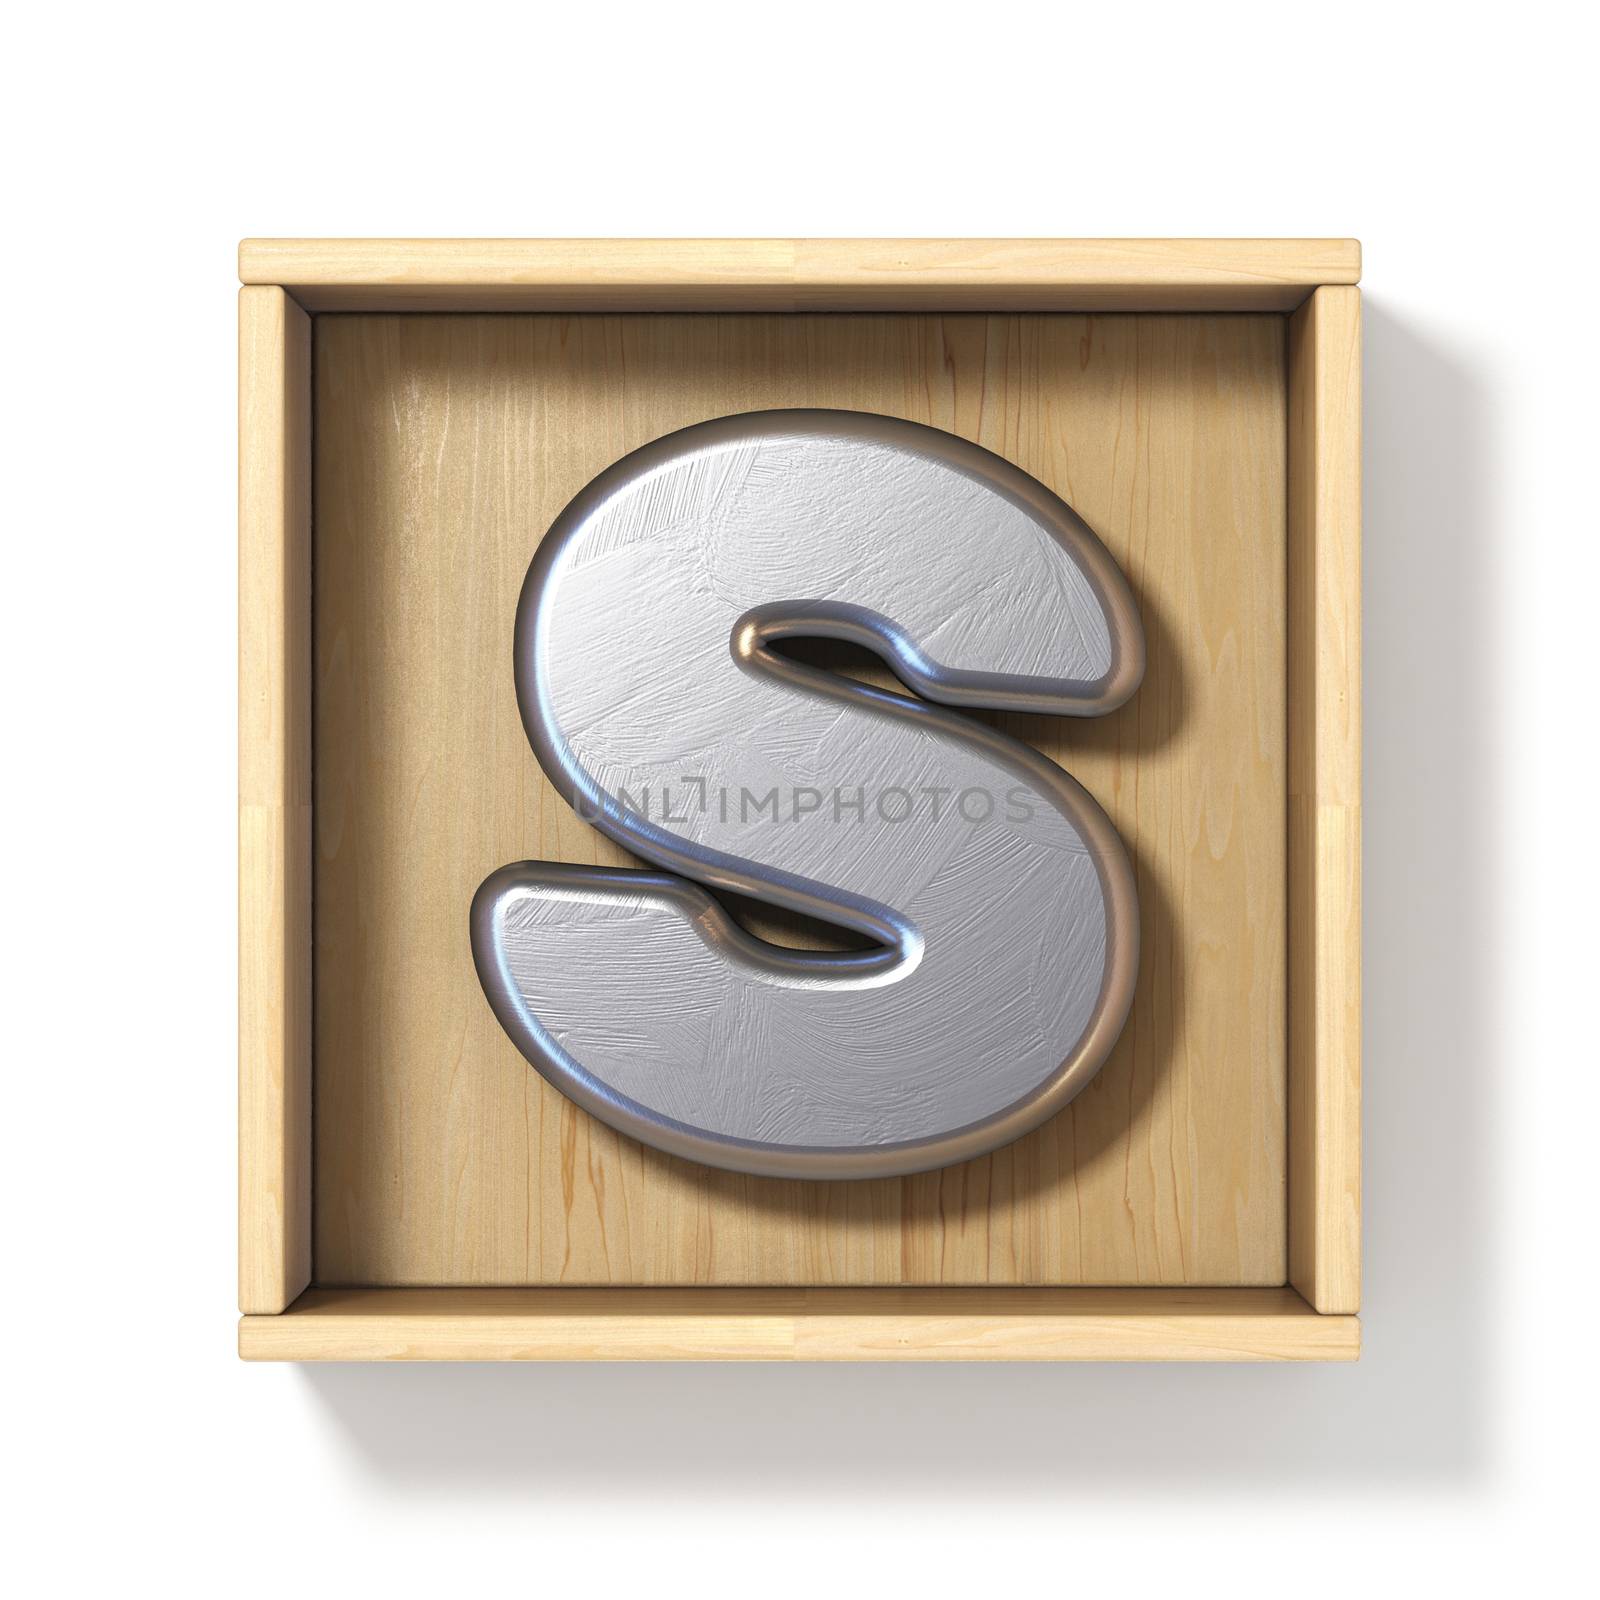 Silver metal letter S in wooden box 3D render illustration isolated on white background